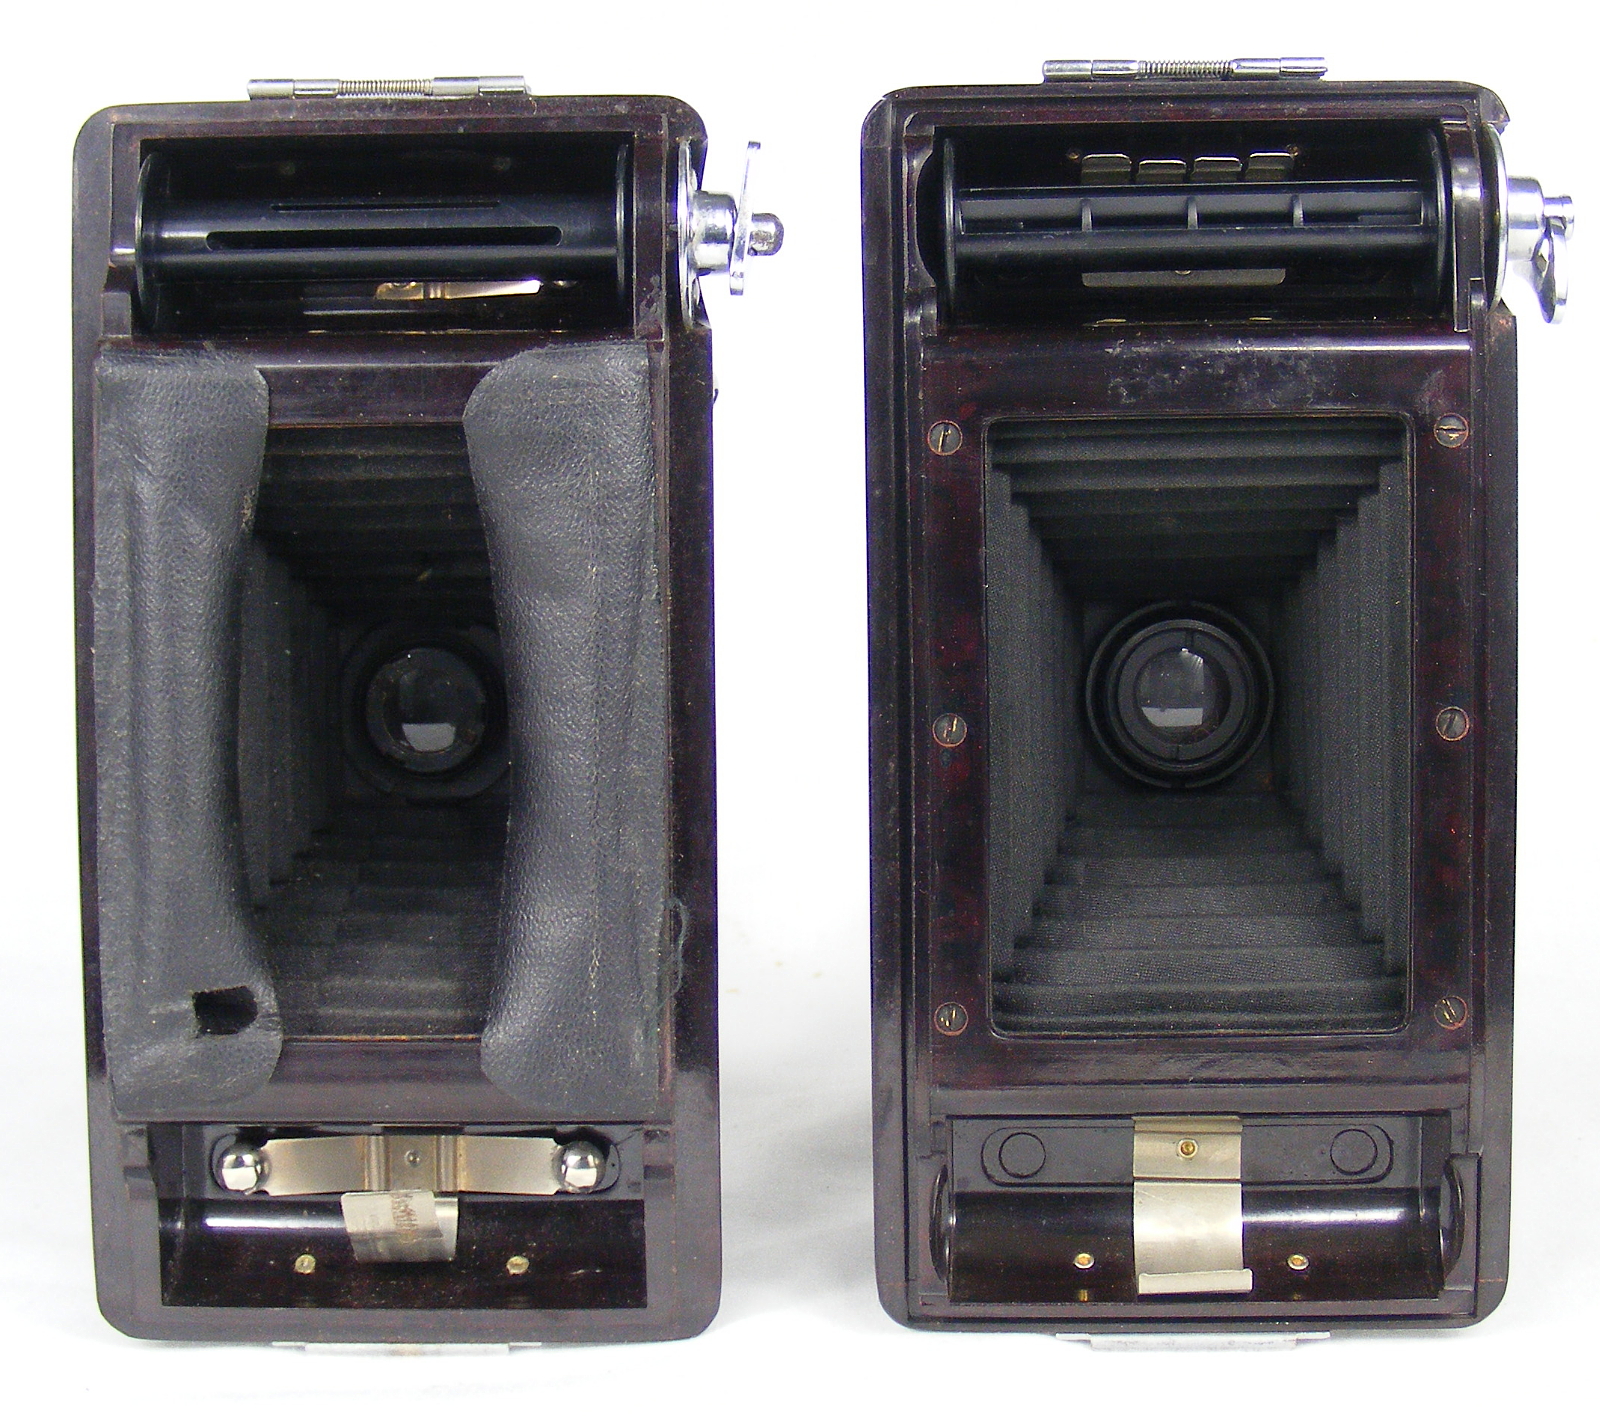 Image of basic Soho Cadet models side by side (rear view)